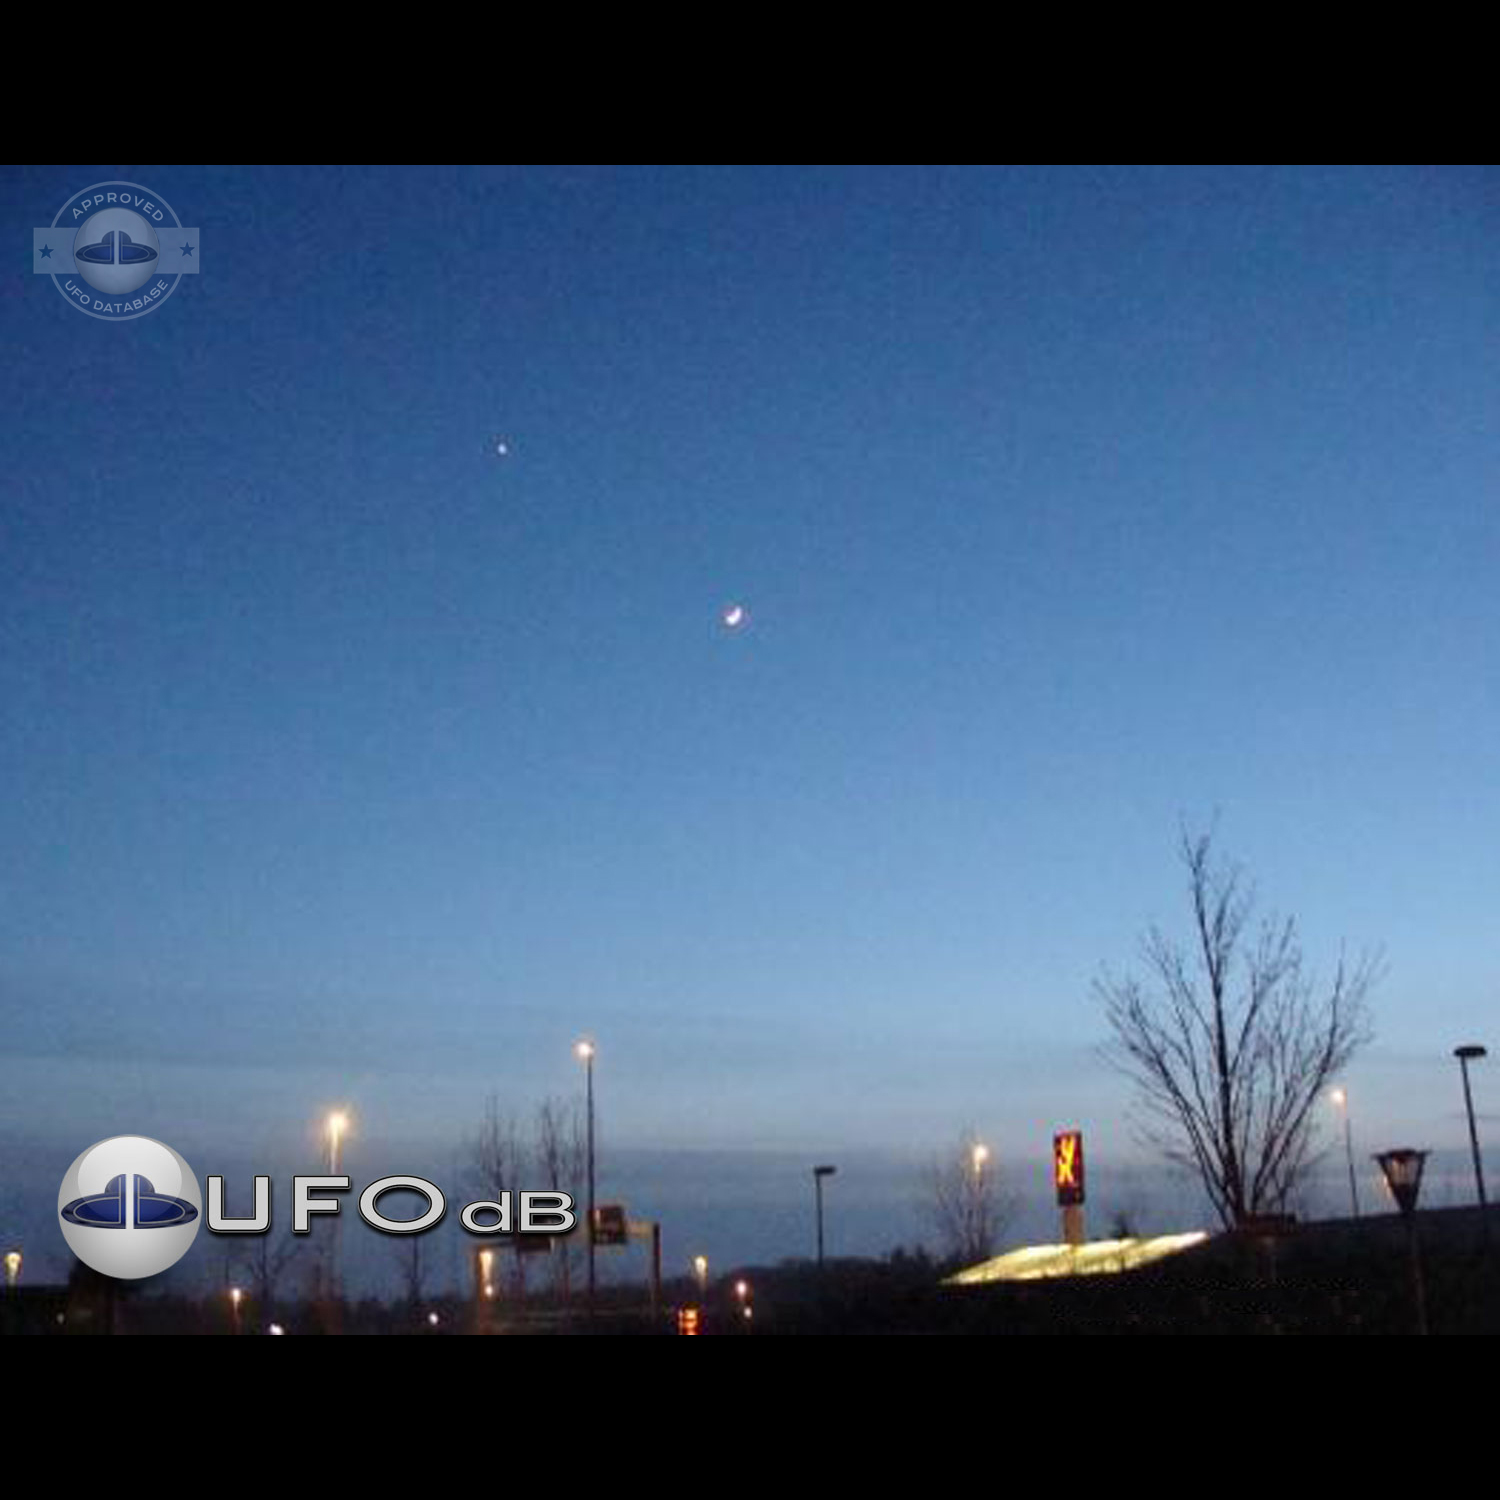 UFO picture of a UFO over a city at night fall in Denmark UFO Picture #10-1